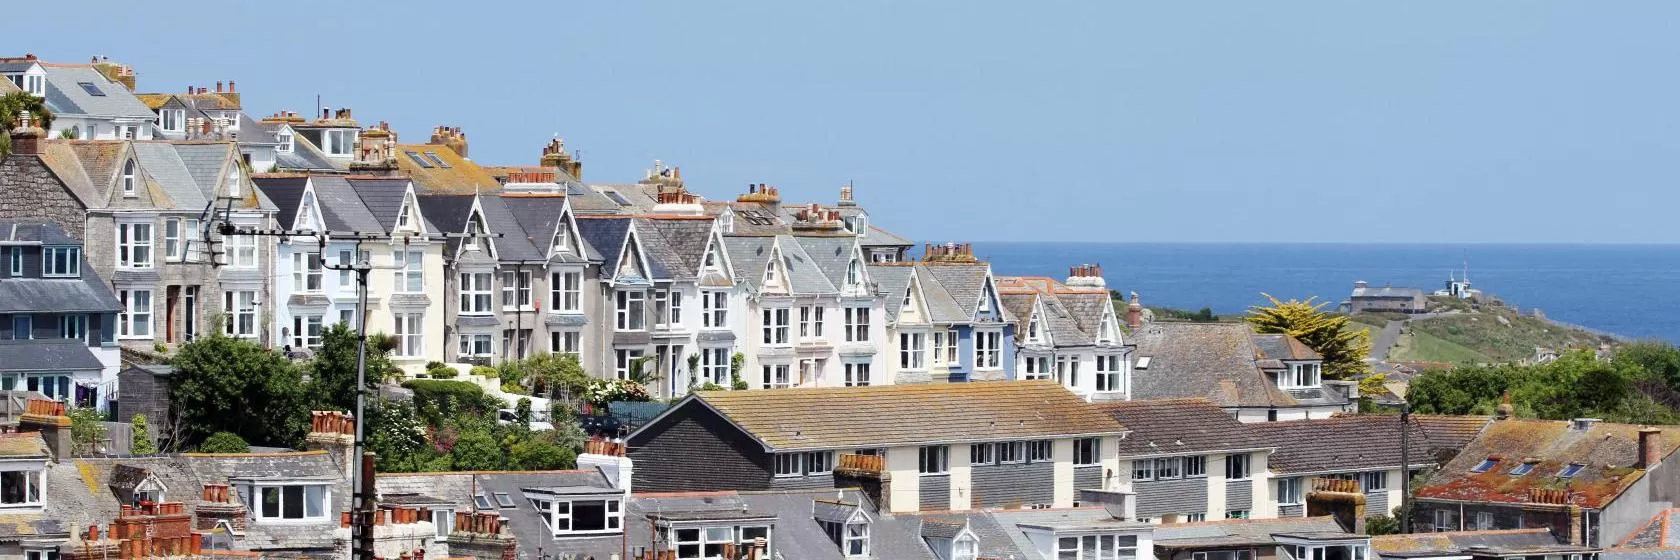 St Ives, Cornwall Hotels